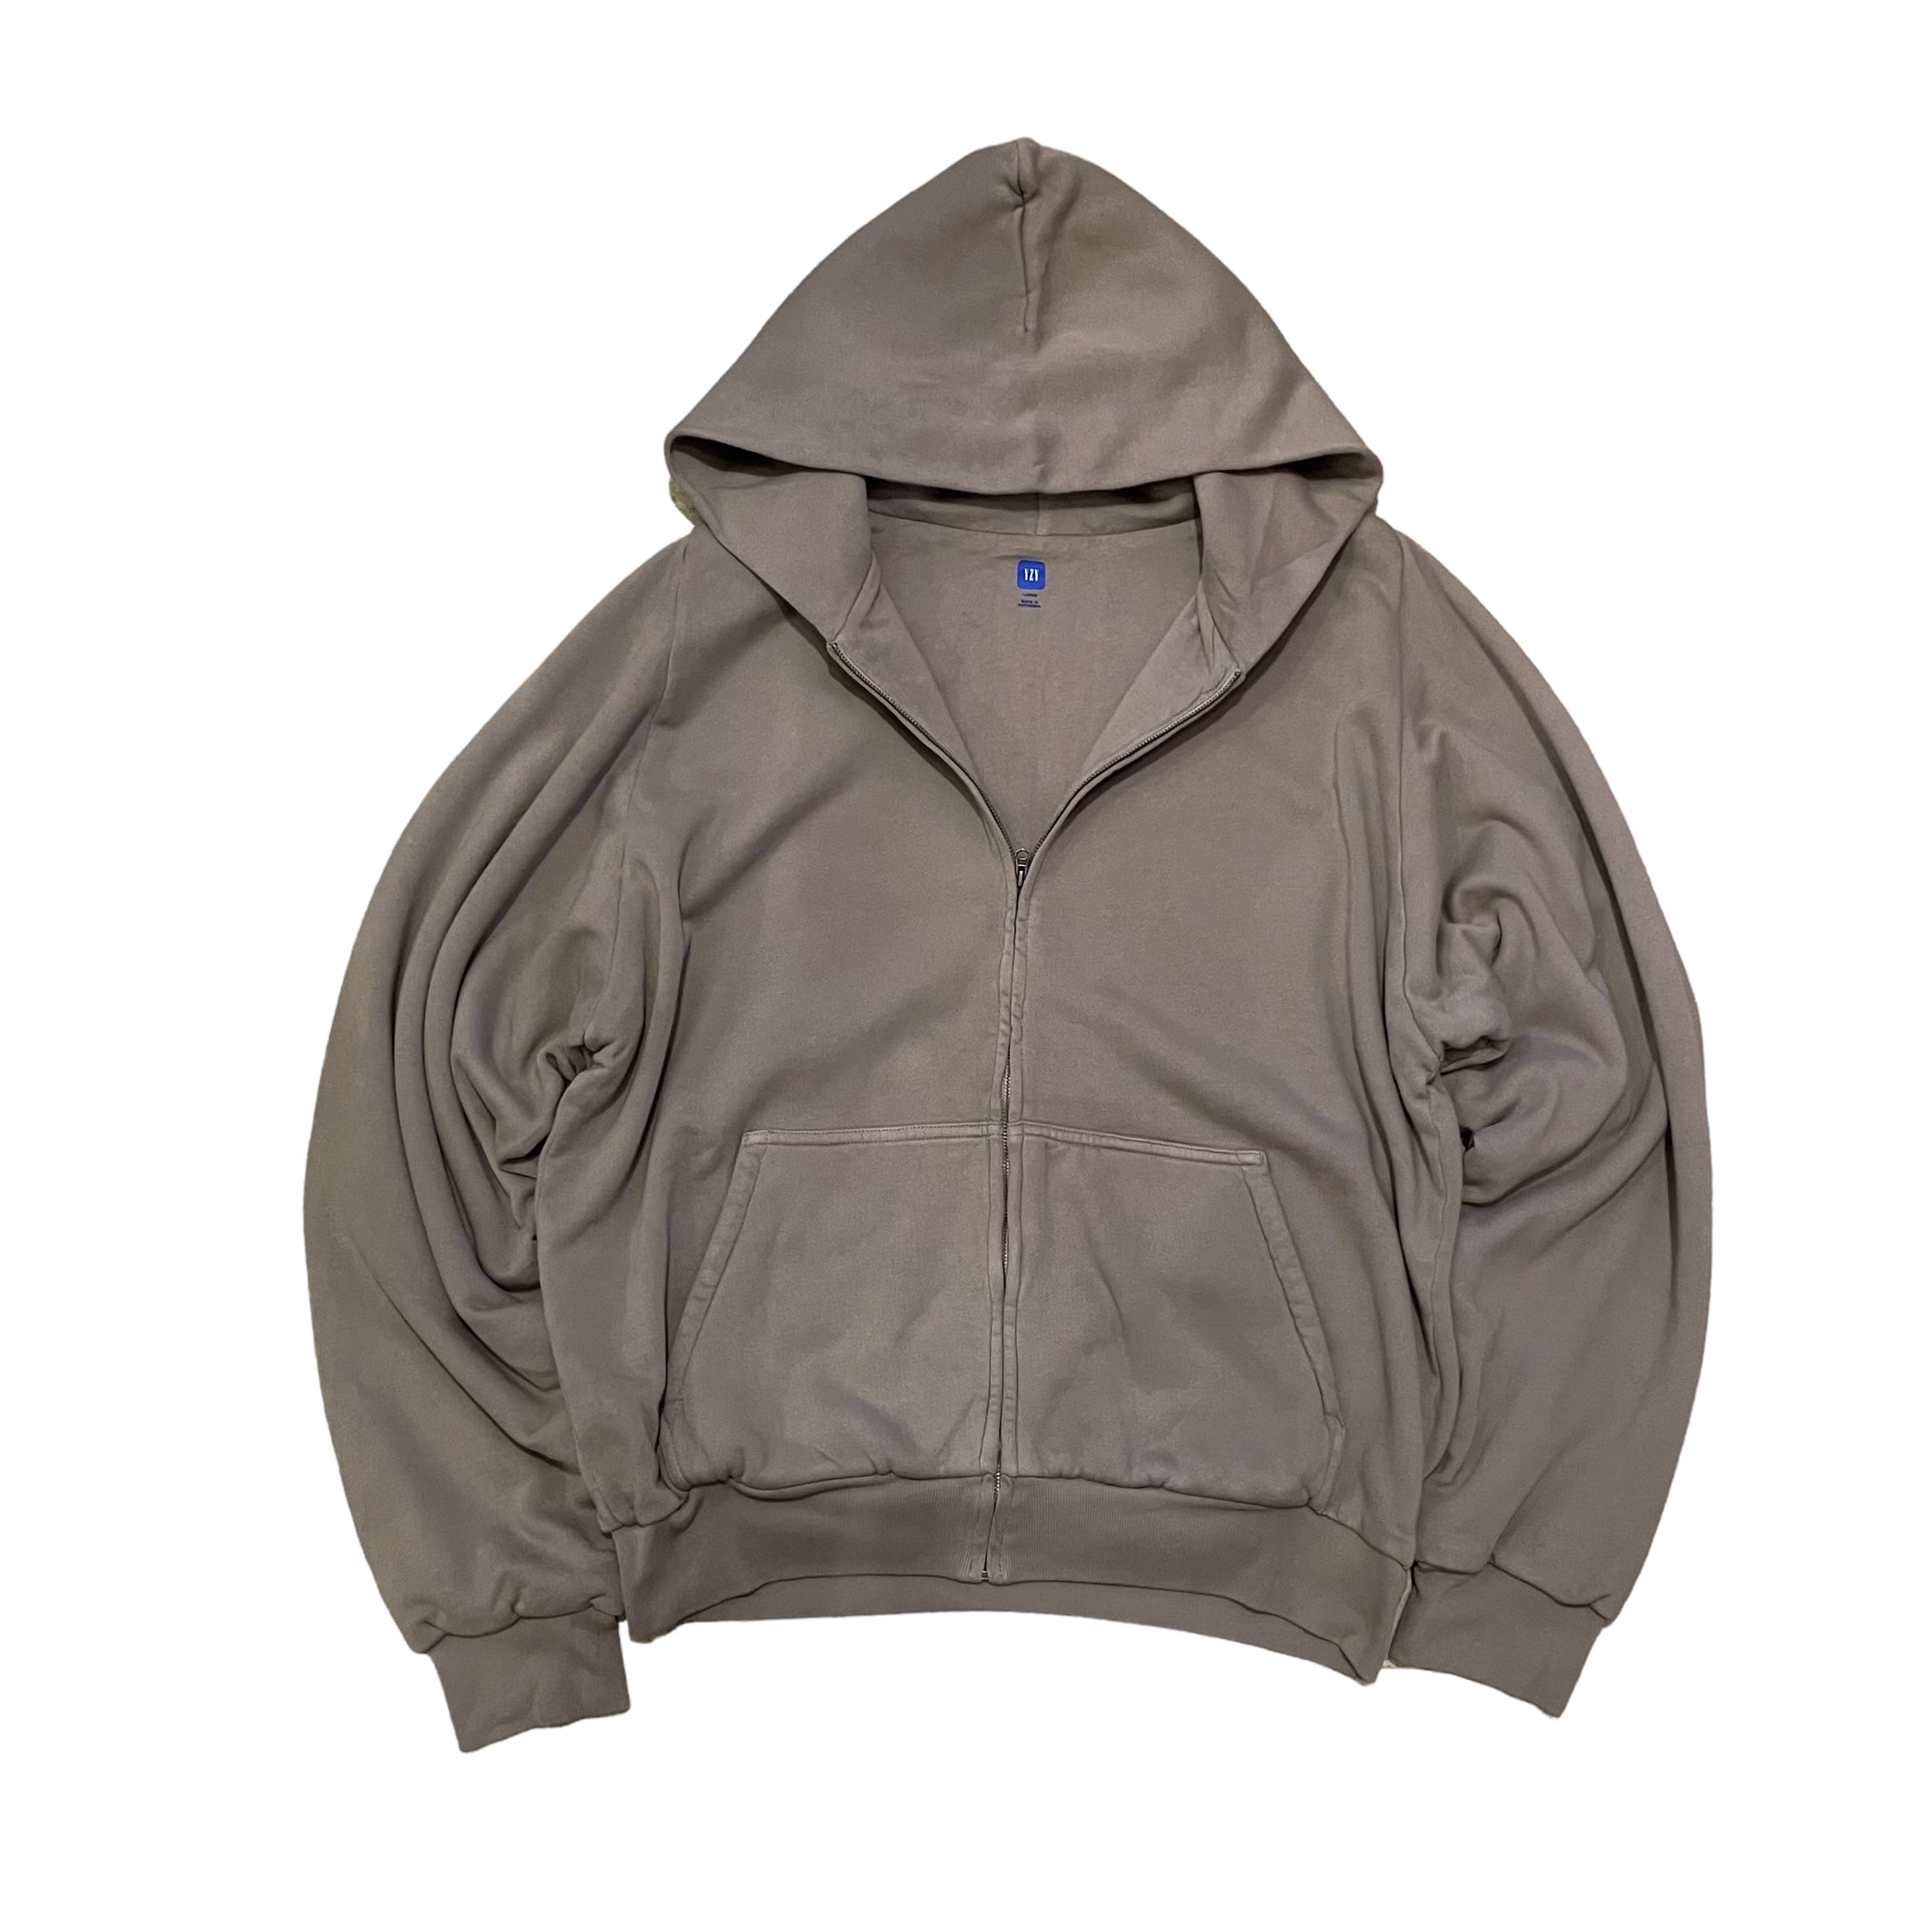 【GRAY 11 size M】 2022s Yeezy×GAP doubleface zip up sweat hoodie | What’z up  powered by BASE